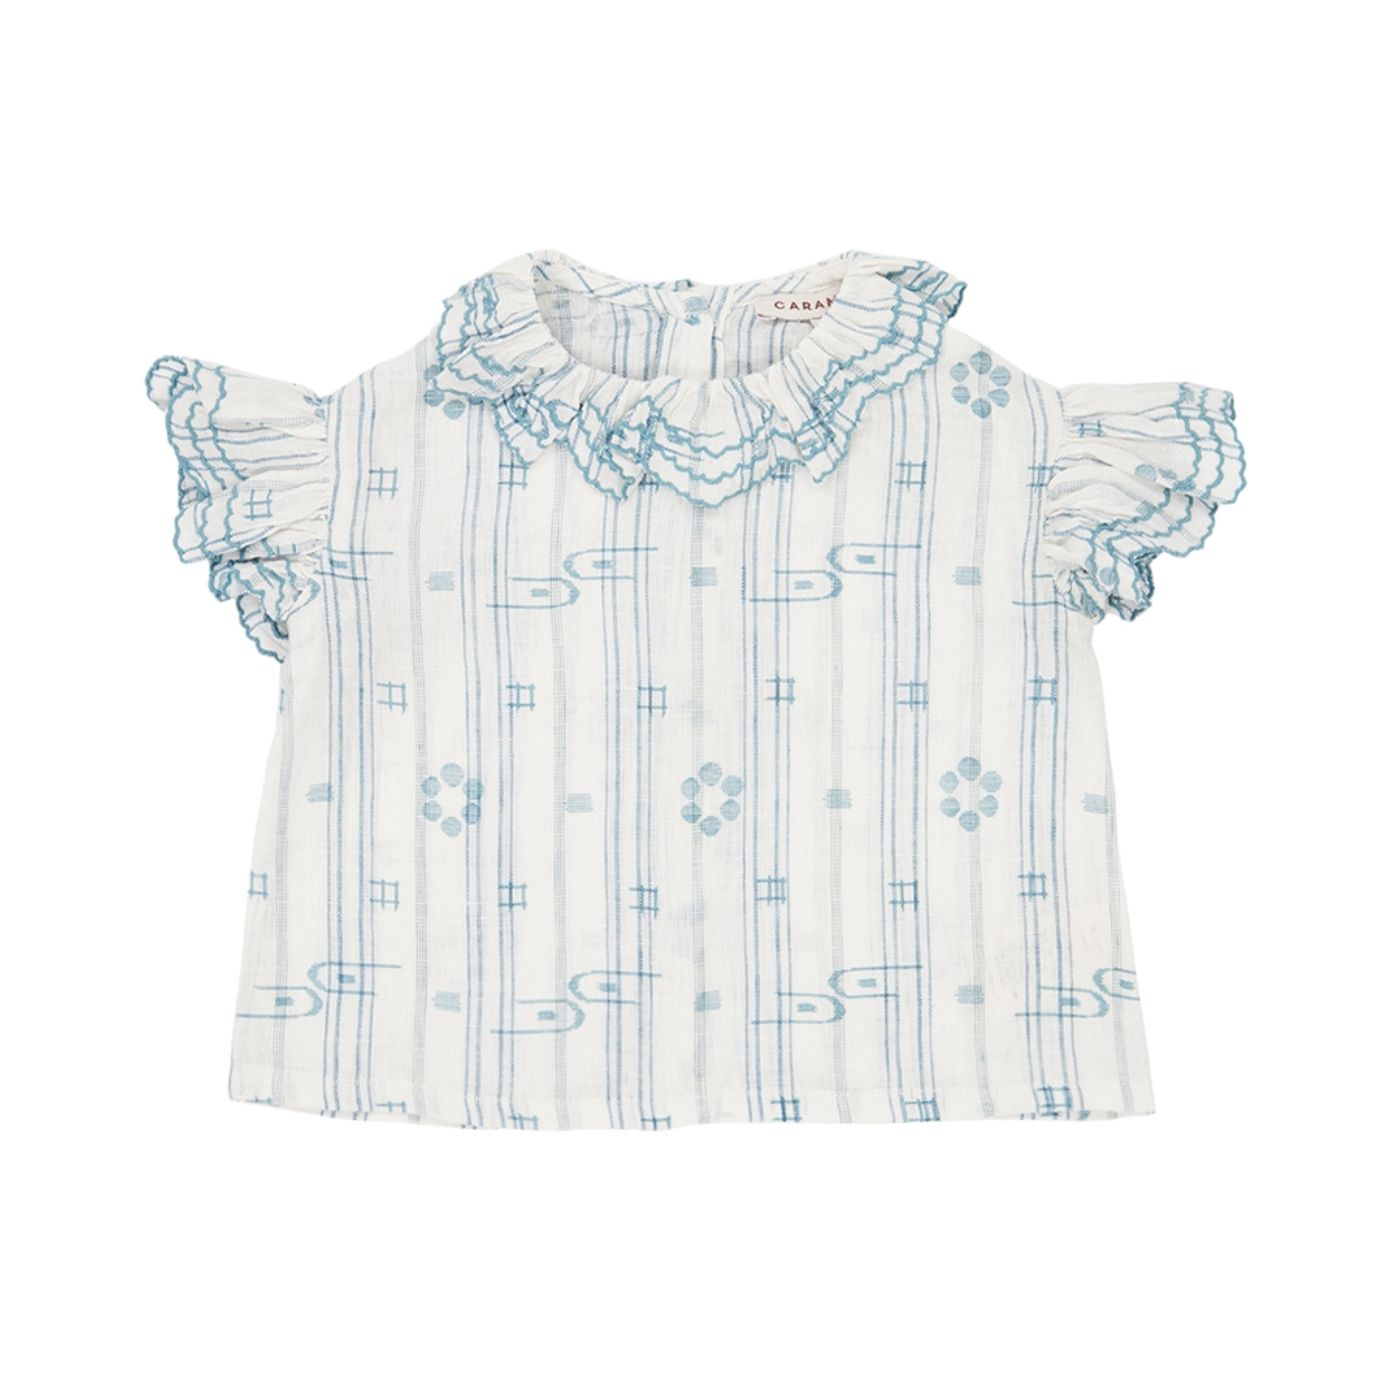 Caramel Baby & Child - Hammersmith Baby Top Blue - Chemisiers & T-shirts -  